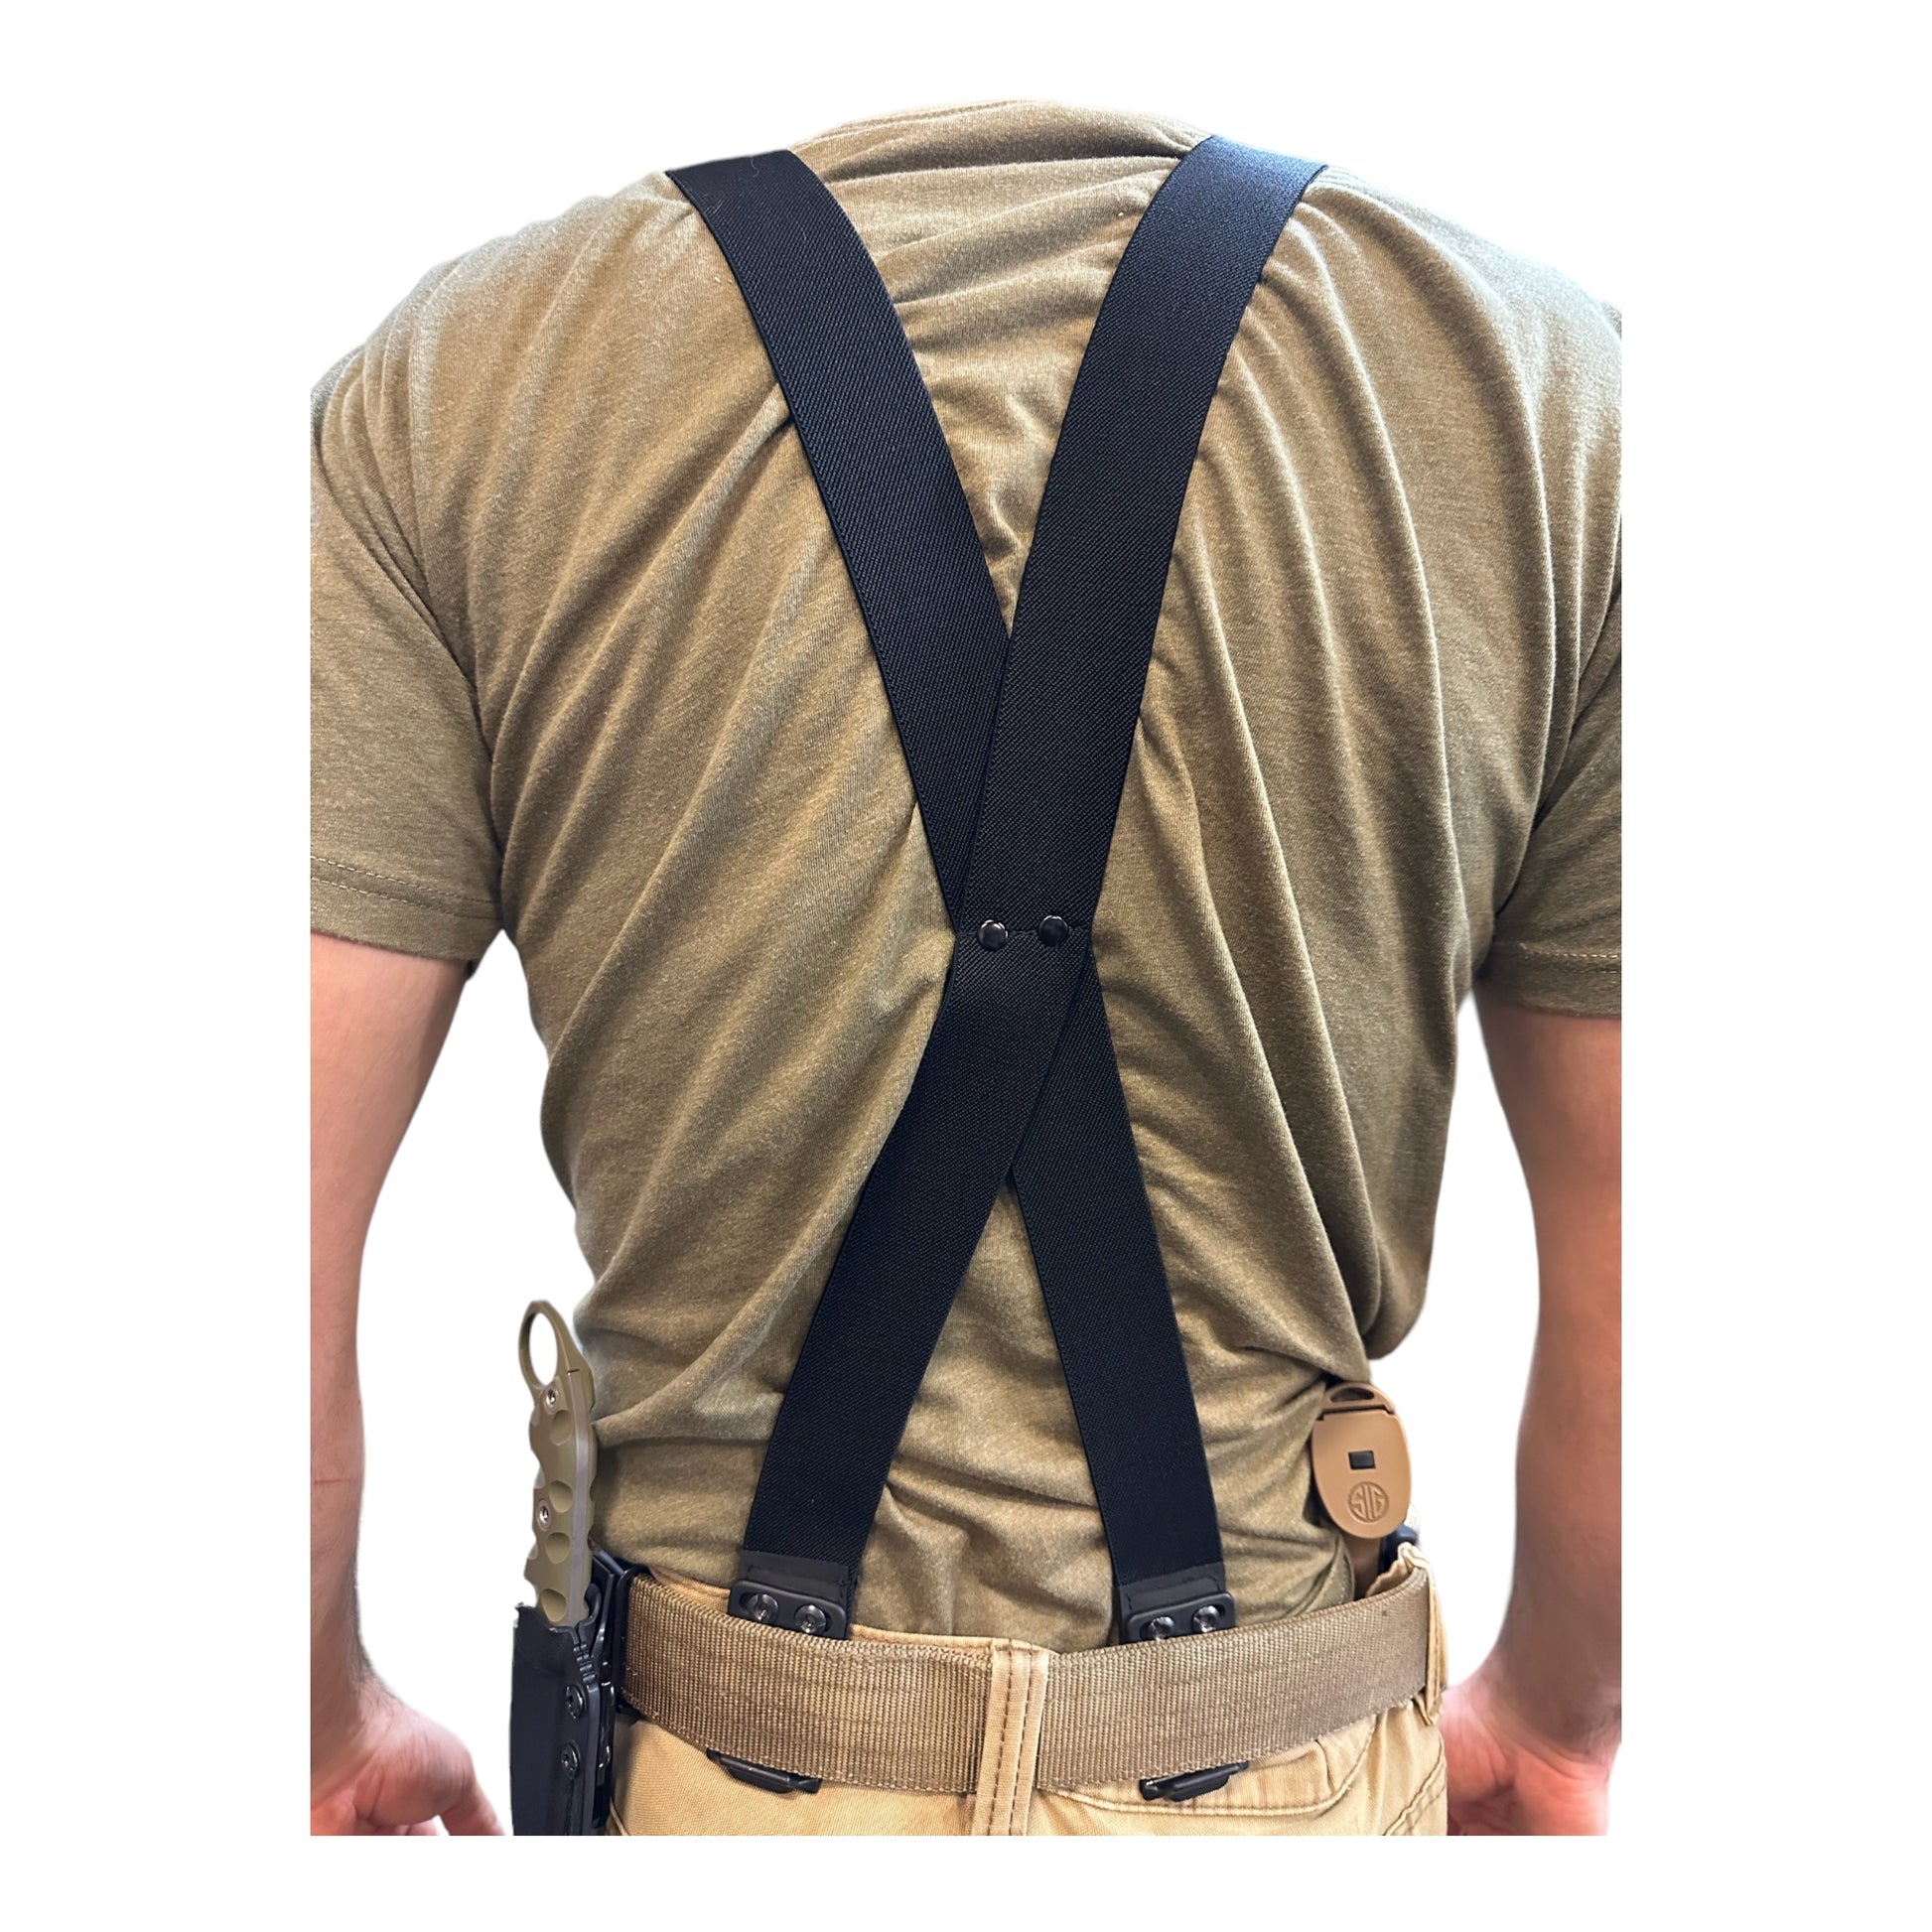 How to Keep Suspenders from Falling Off Your Shoulders